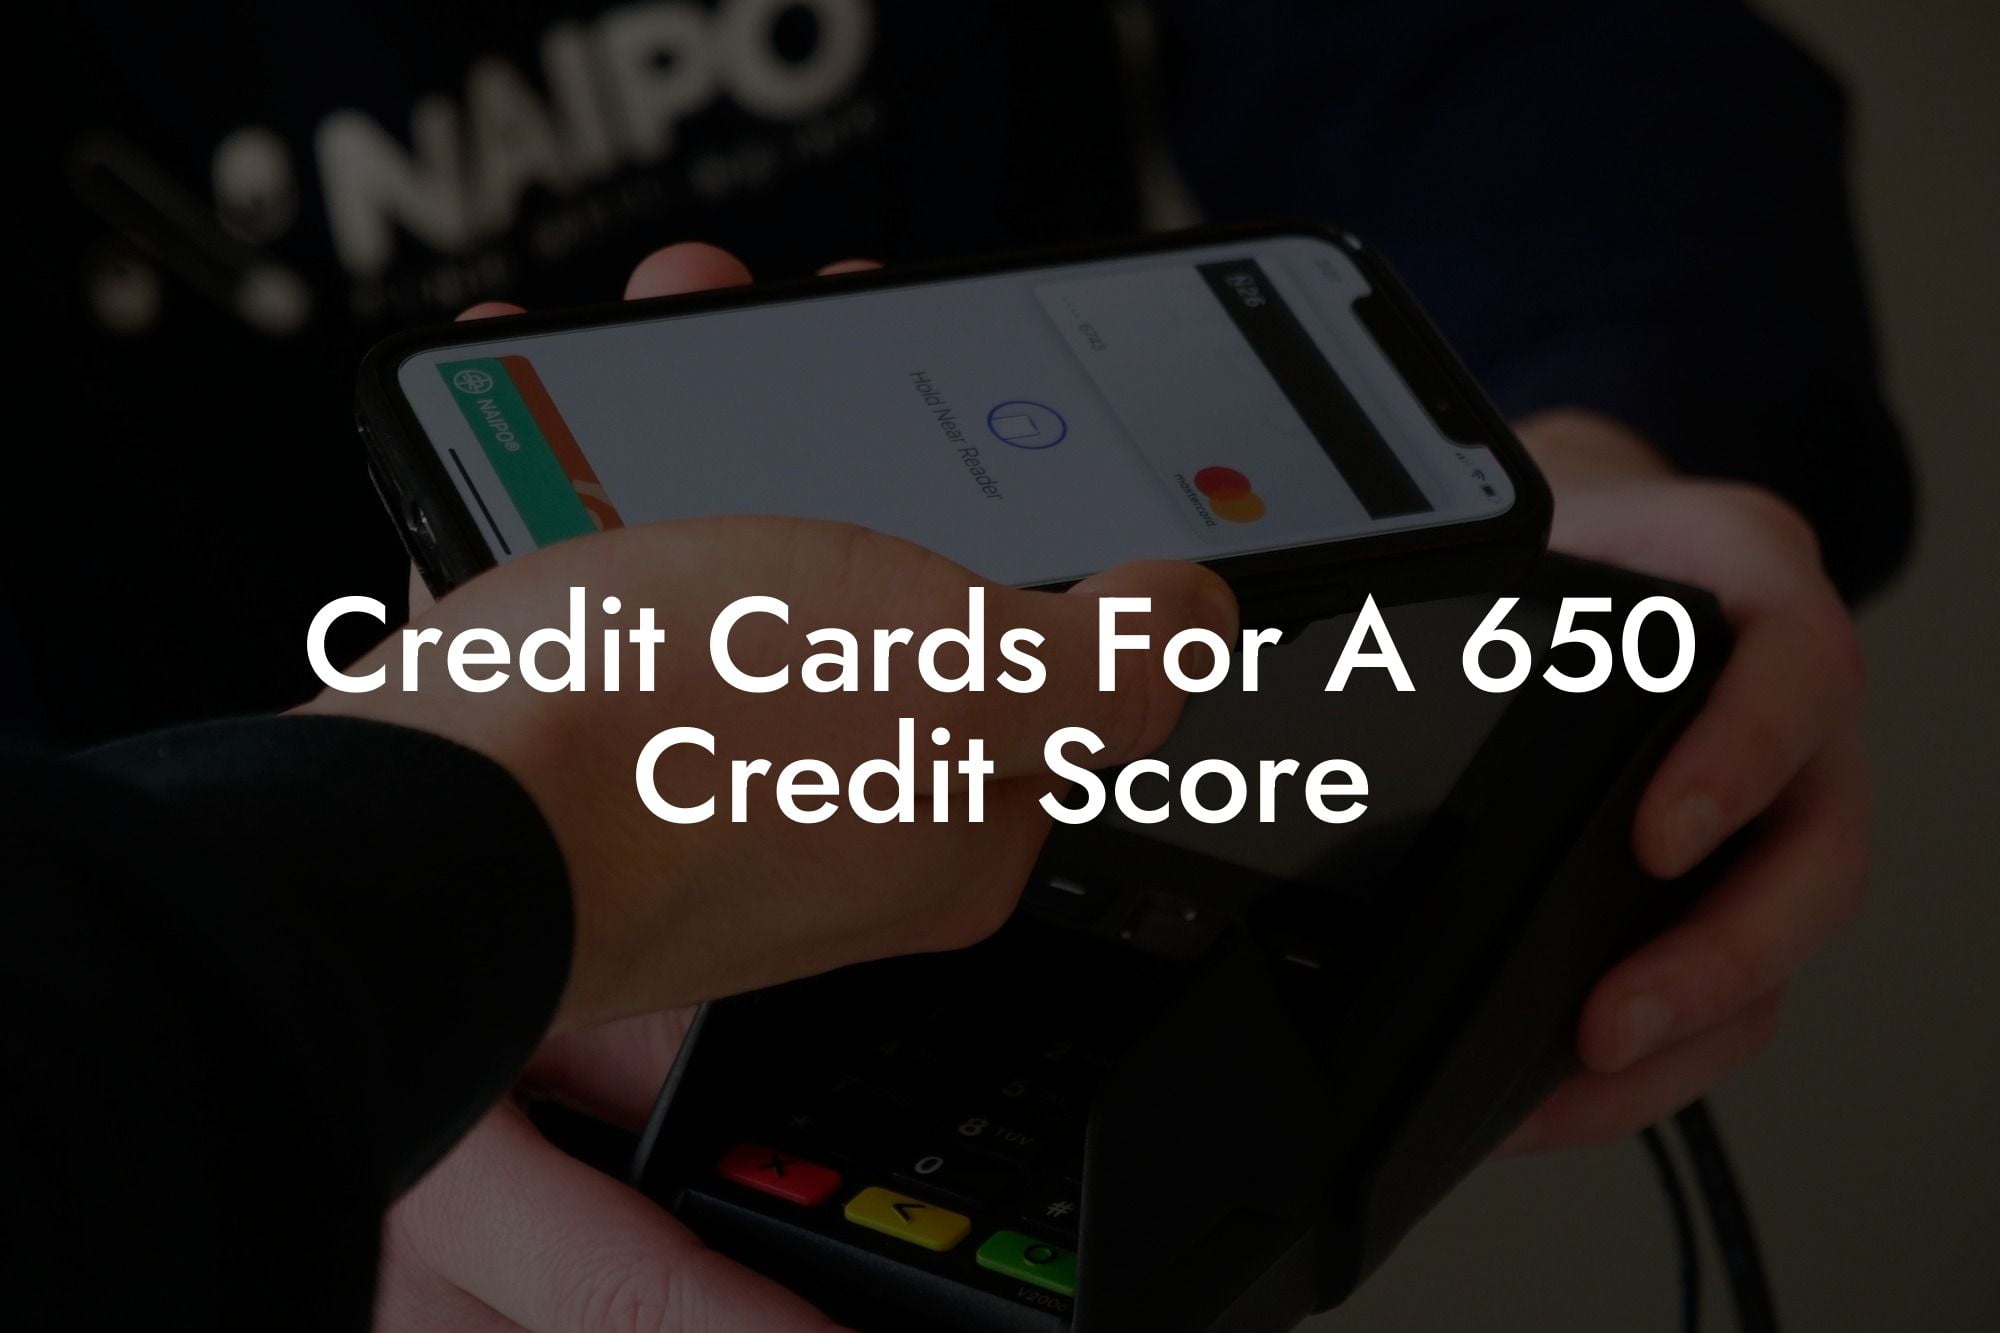 Credit Cards For A 650 Credit Score